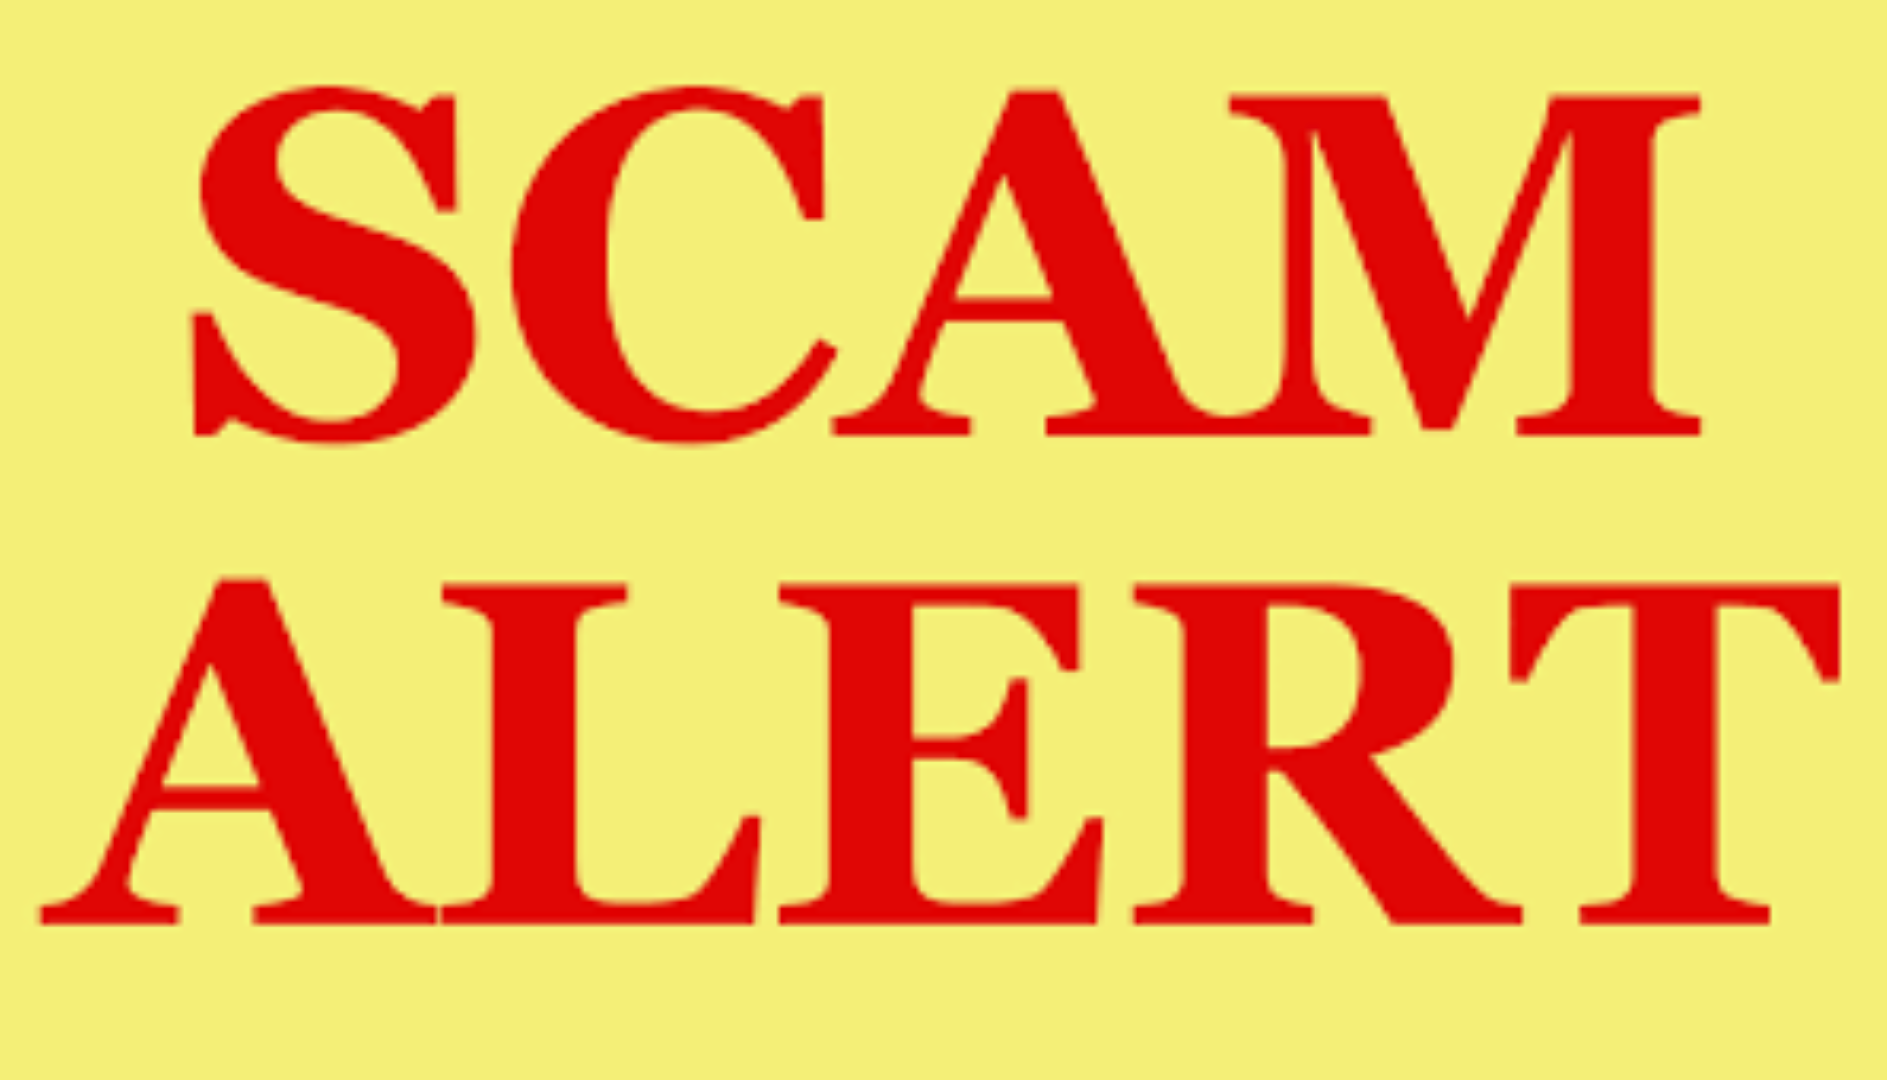 Disclaimer of Scam Interview at Pelings